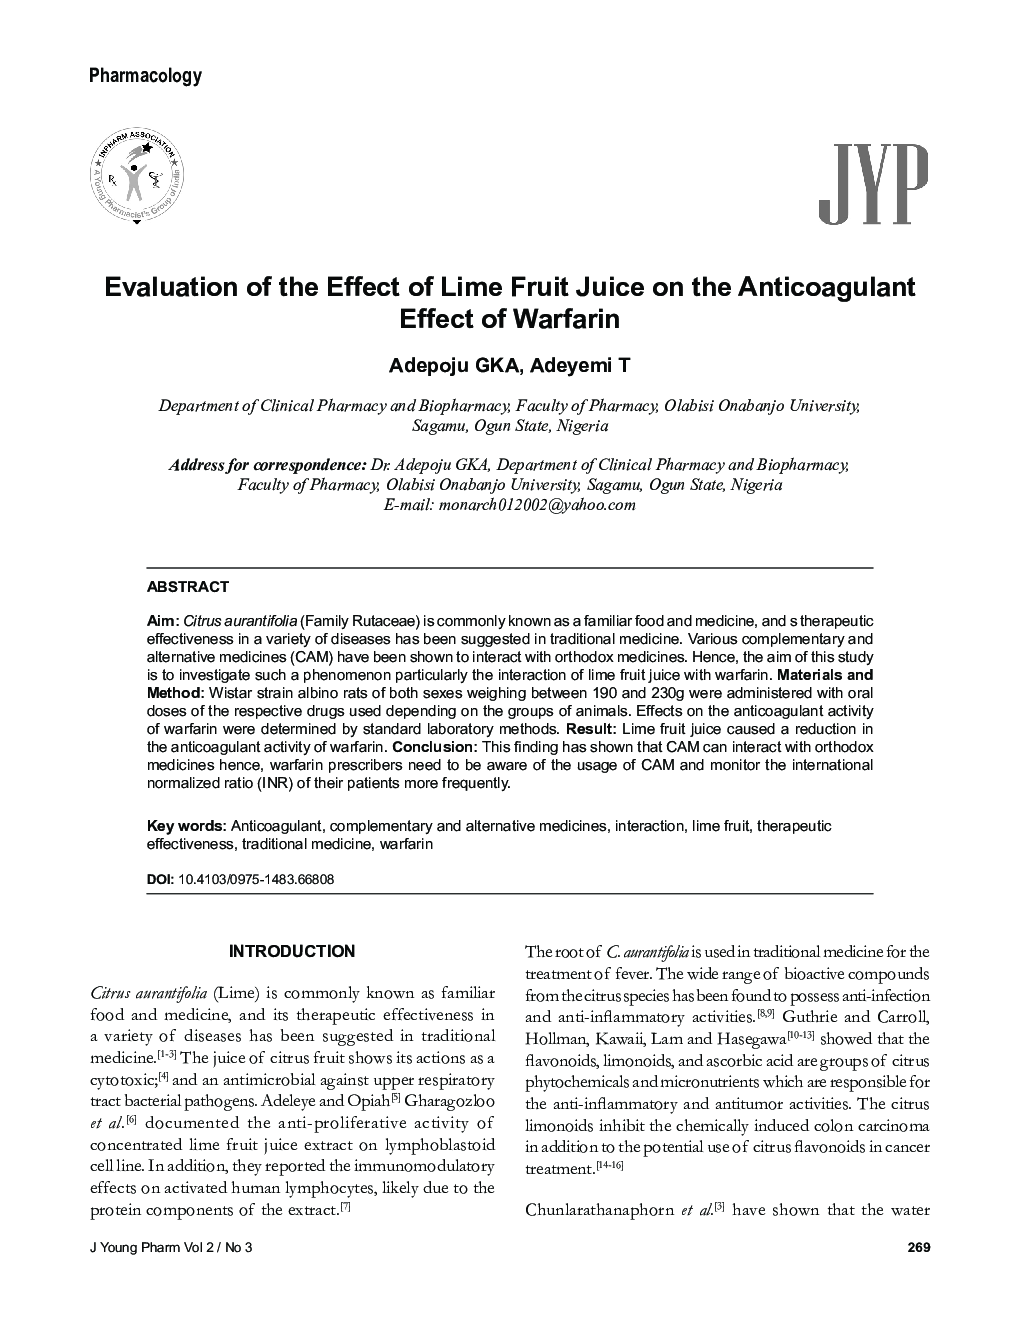 Evaluation of the Effect of Lime Fruit Juice on the Anticoagulant Effect of Warfarin